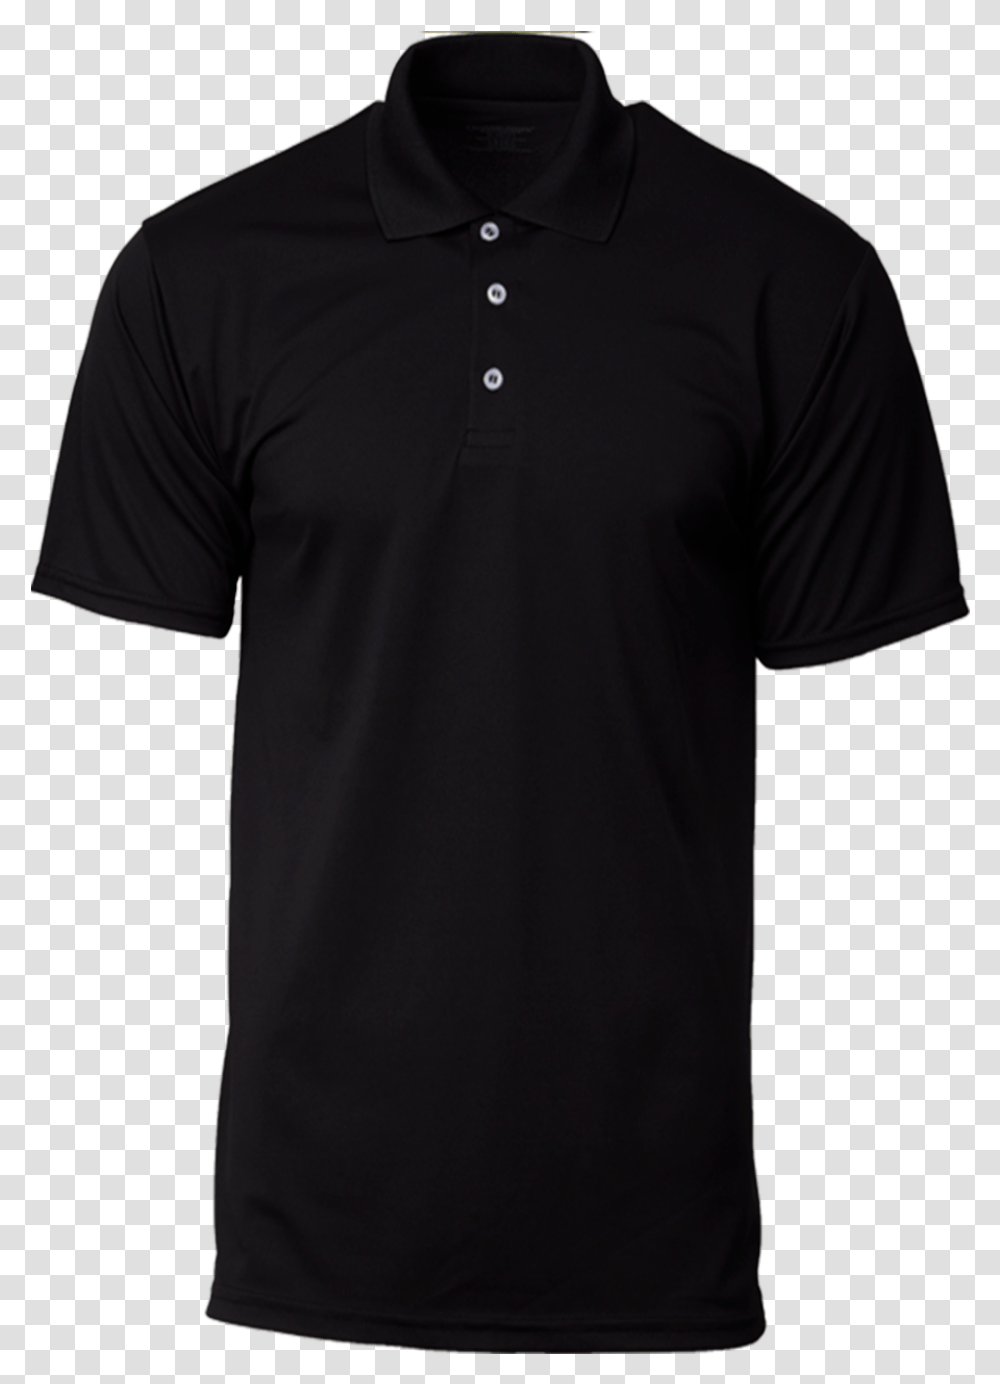 Under Armour Corporate Performance Polo, Shirt, Sleeve, Jersey Transparent Png